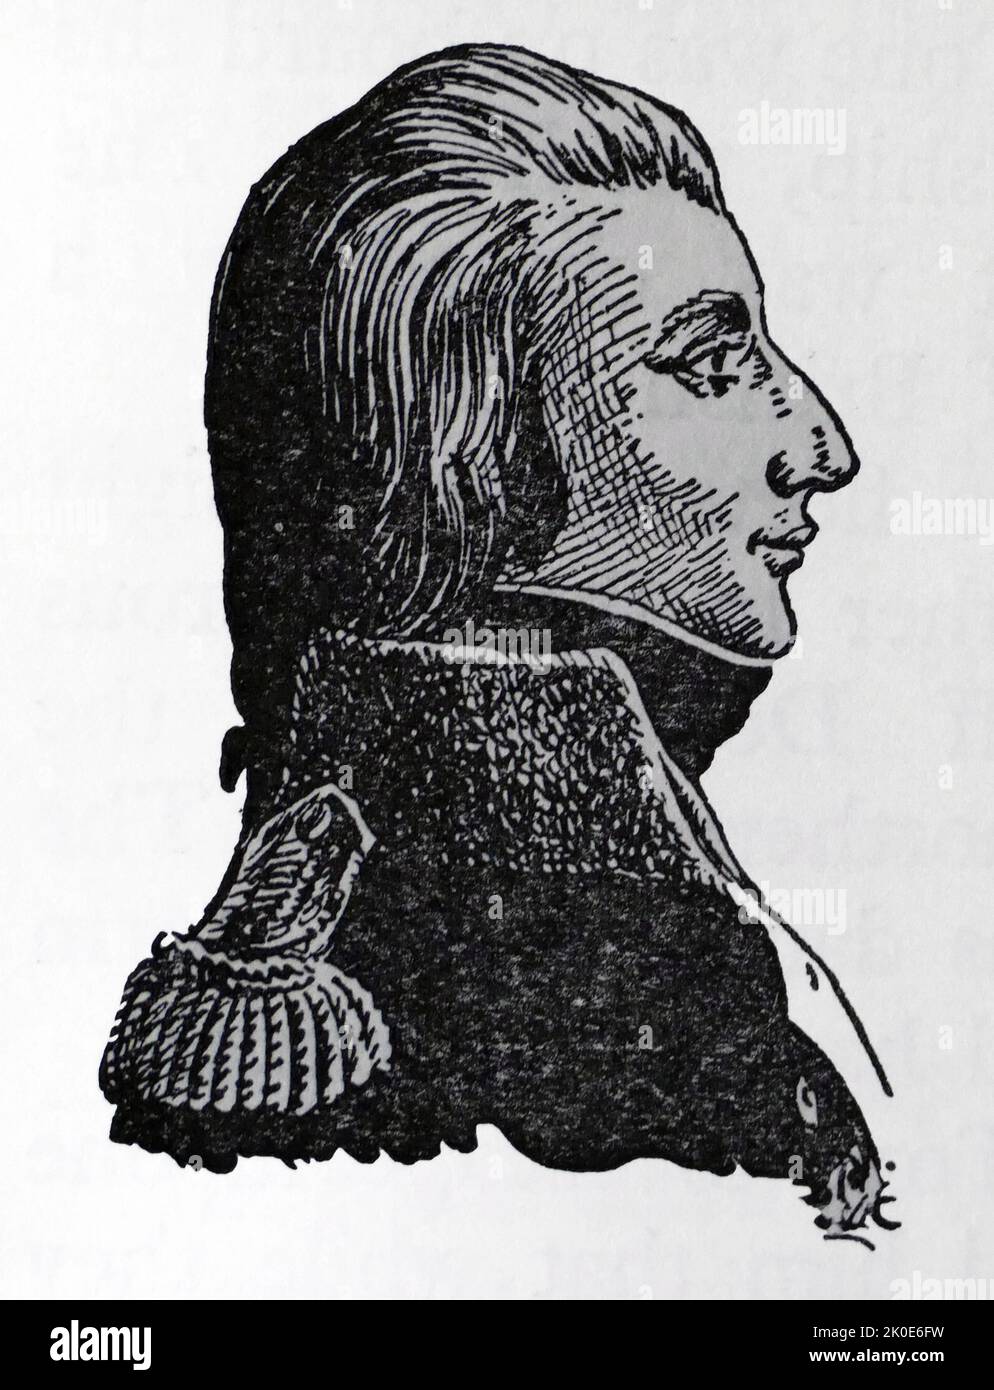 Theobald Wolfe Tone, posthumously known as Wolfe Tone (20 June 1763 - 19 November 1798), was a leading Irish revolutionary figure and one of the founding members of the United Irishmen, a republican society that revolted against British rule in Ireland, where he was a leader going into the 1798 Irish Rebellion. Stock Photo